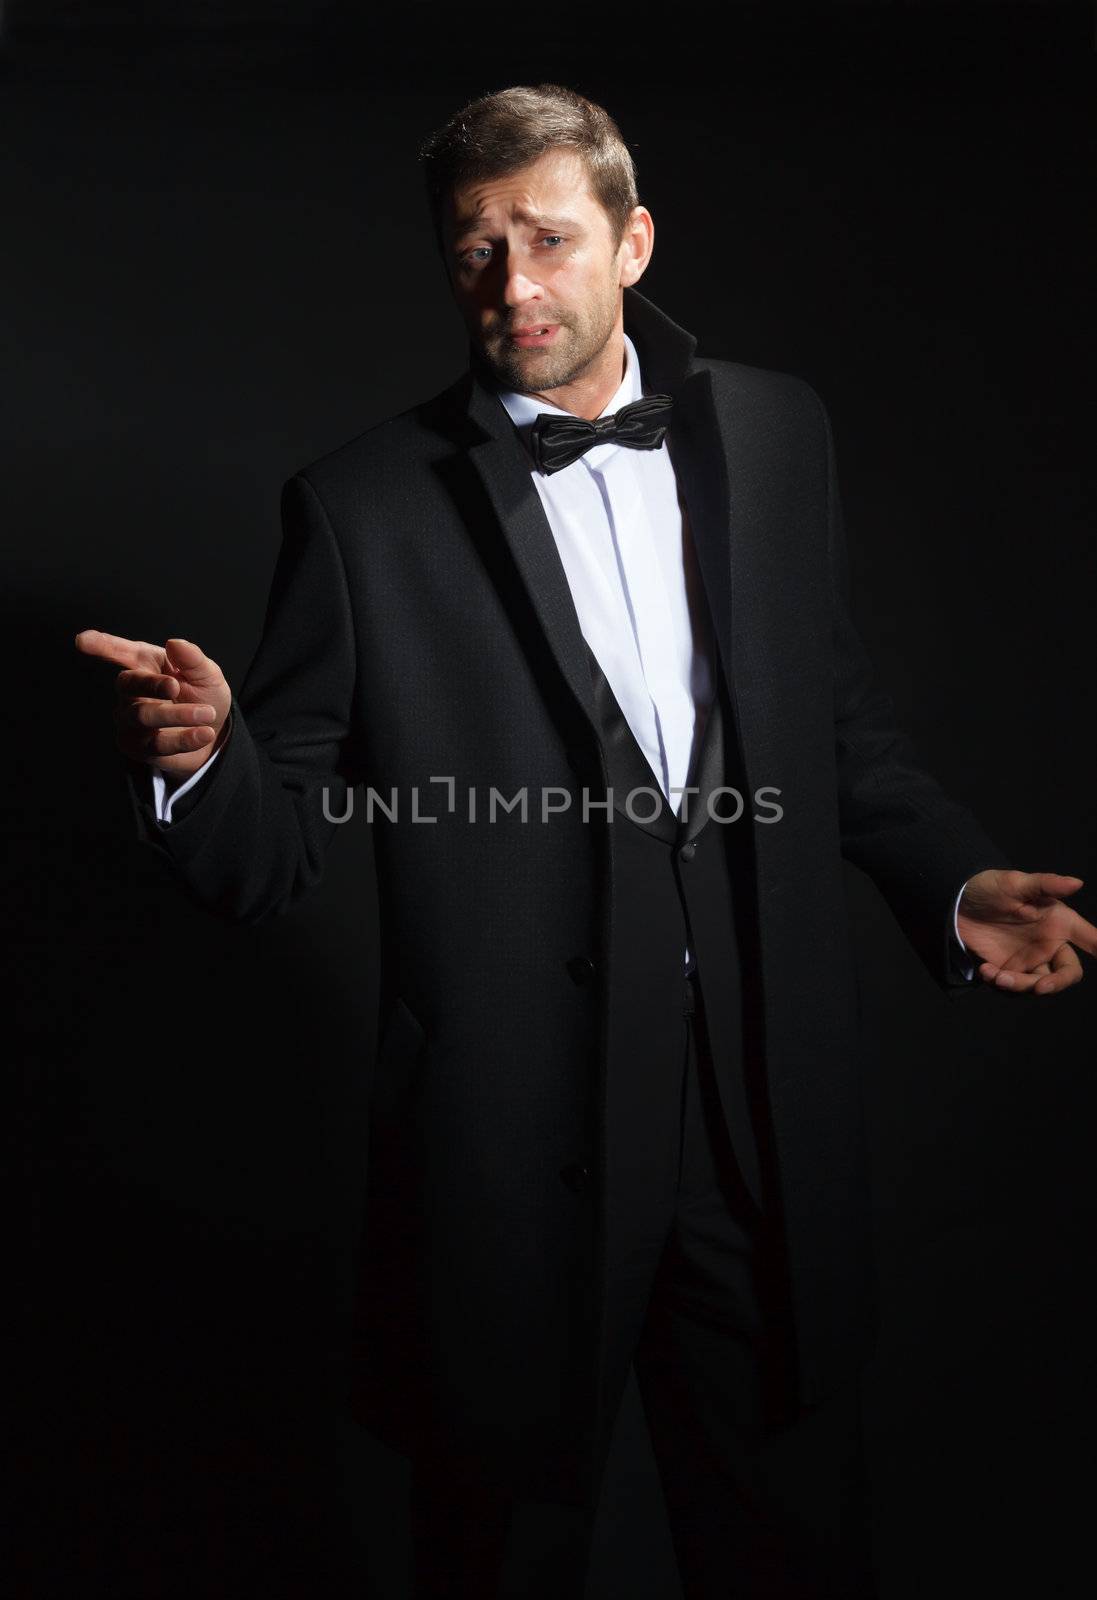 Dramatic portrait of a suave handsome man in a tuxedo and bowtie highlighted in darkness